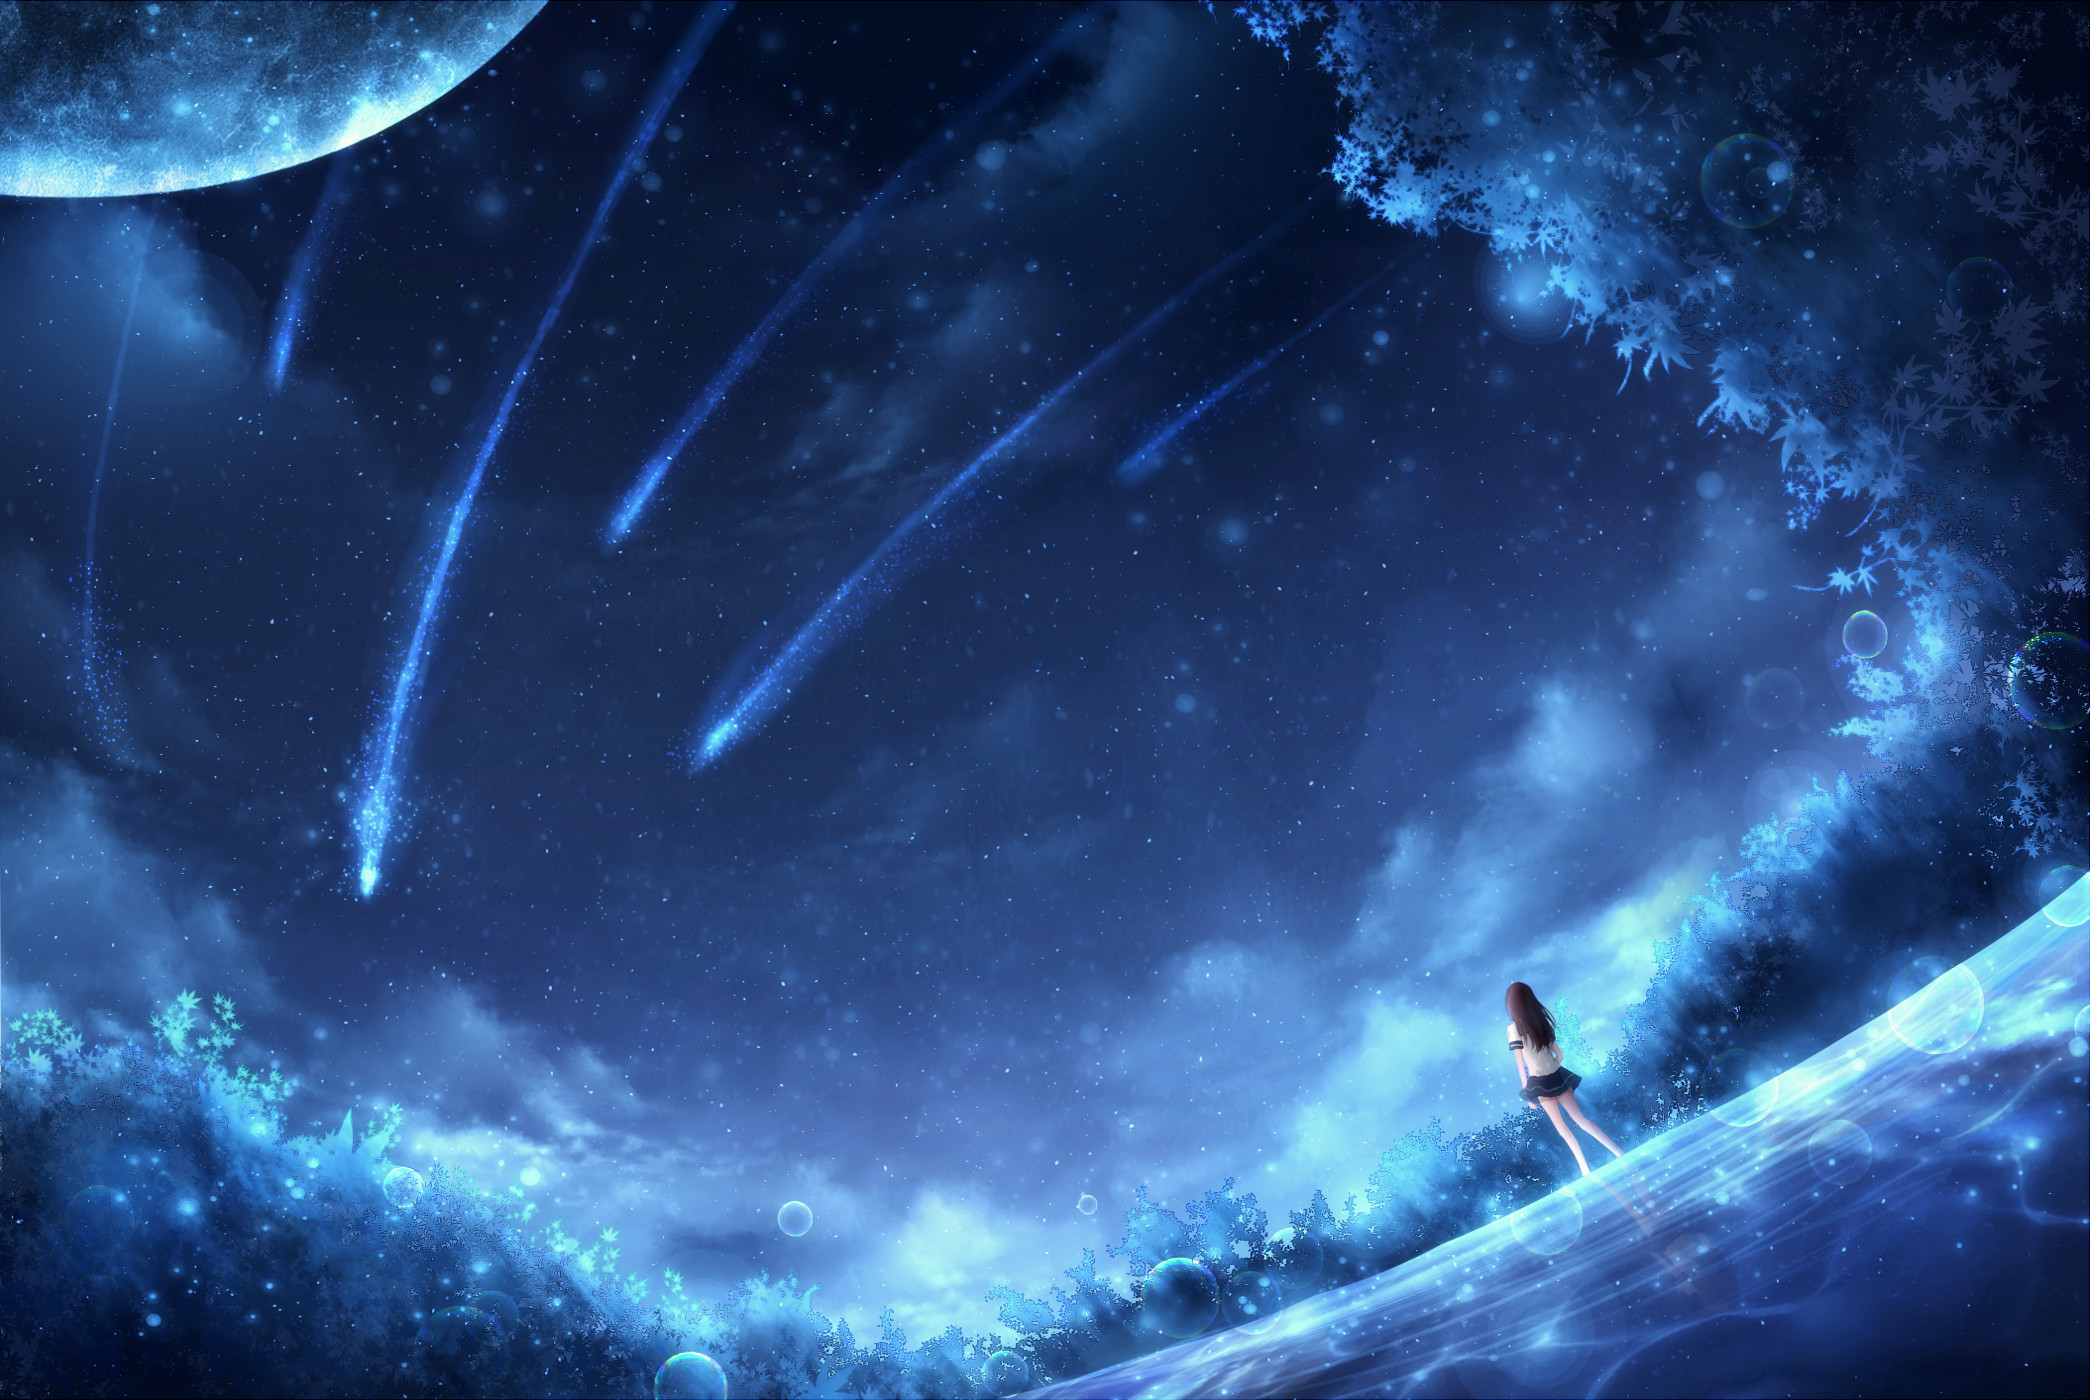 Anime Night HD Wallpaper by CZY